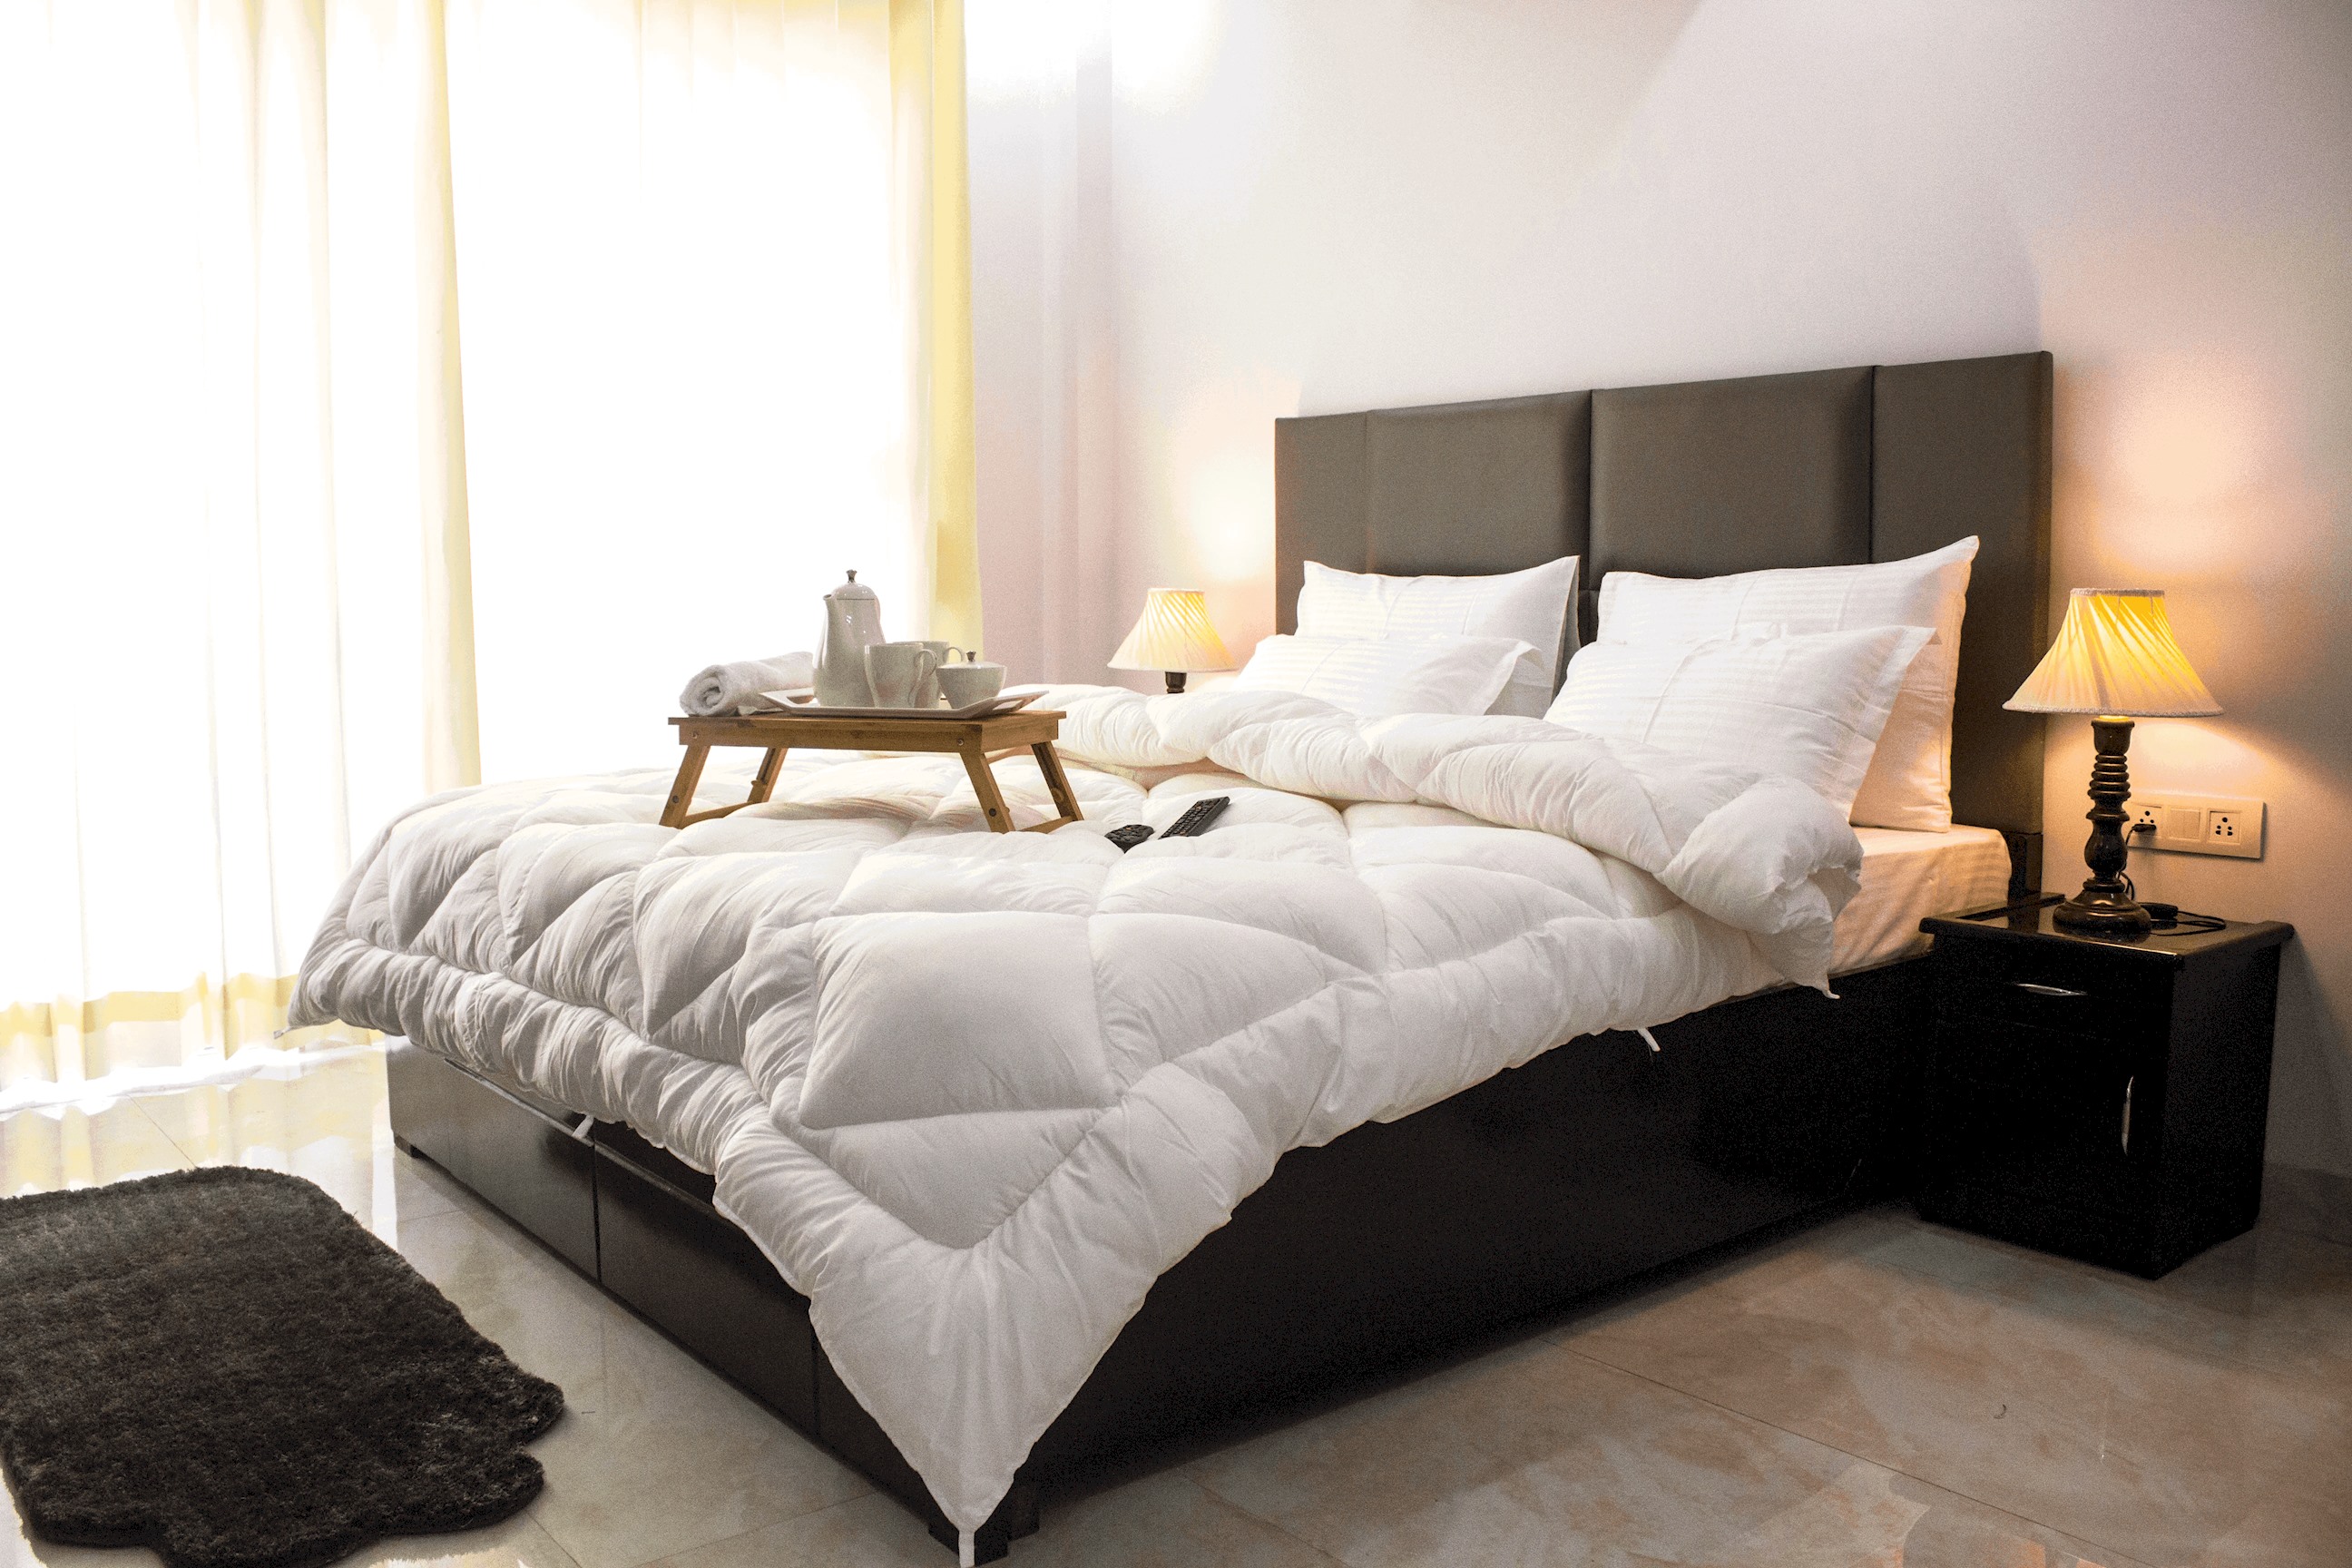 Relax in Comfort: Bedroom Featuring Orthopedic Mattresses for a Restful Night